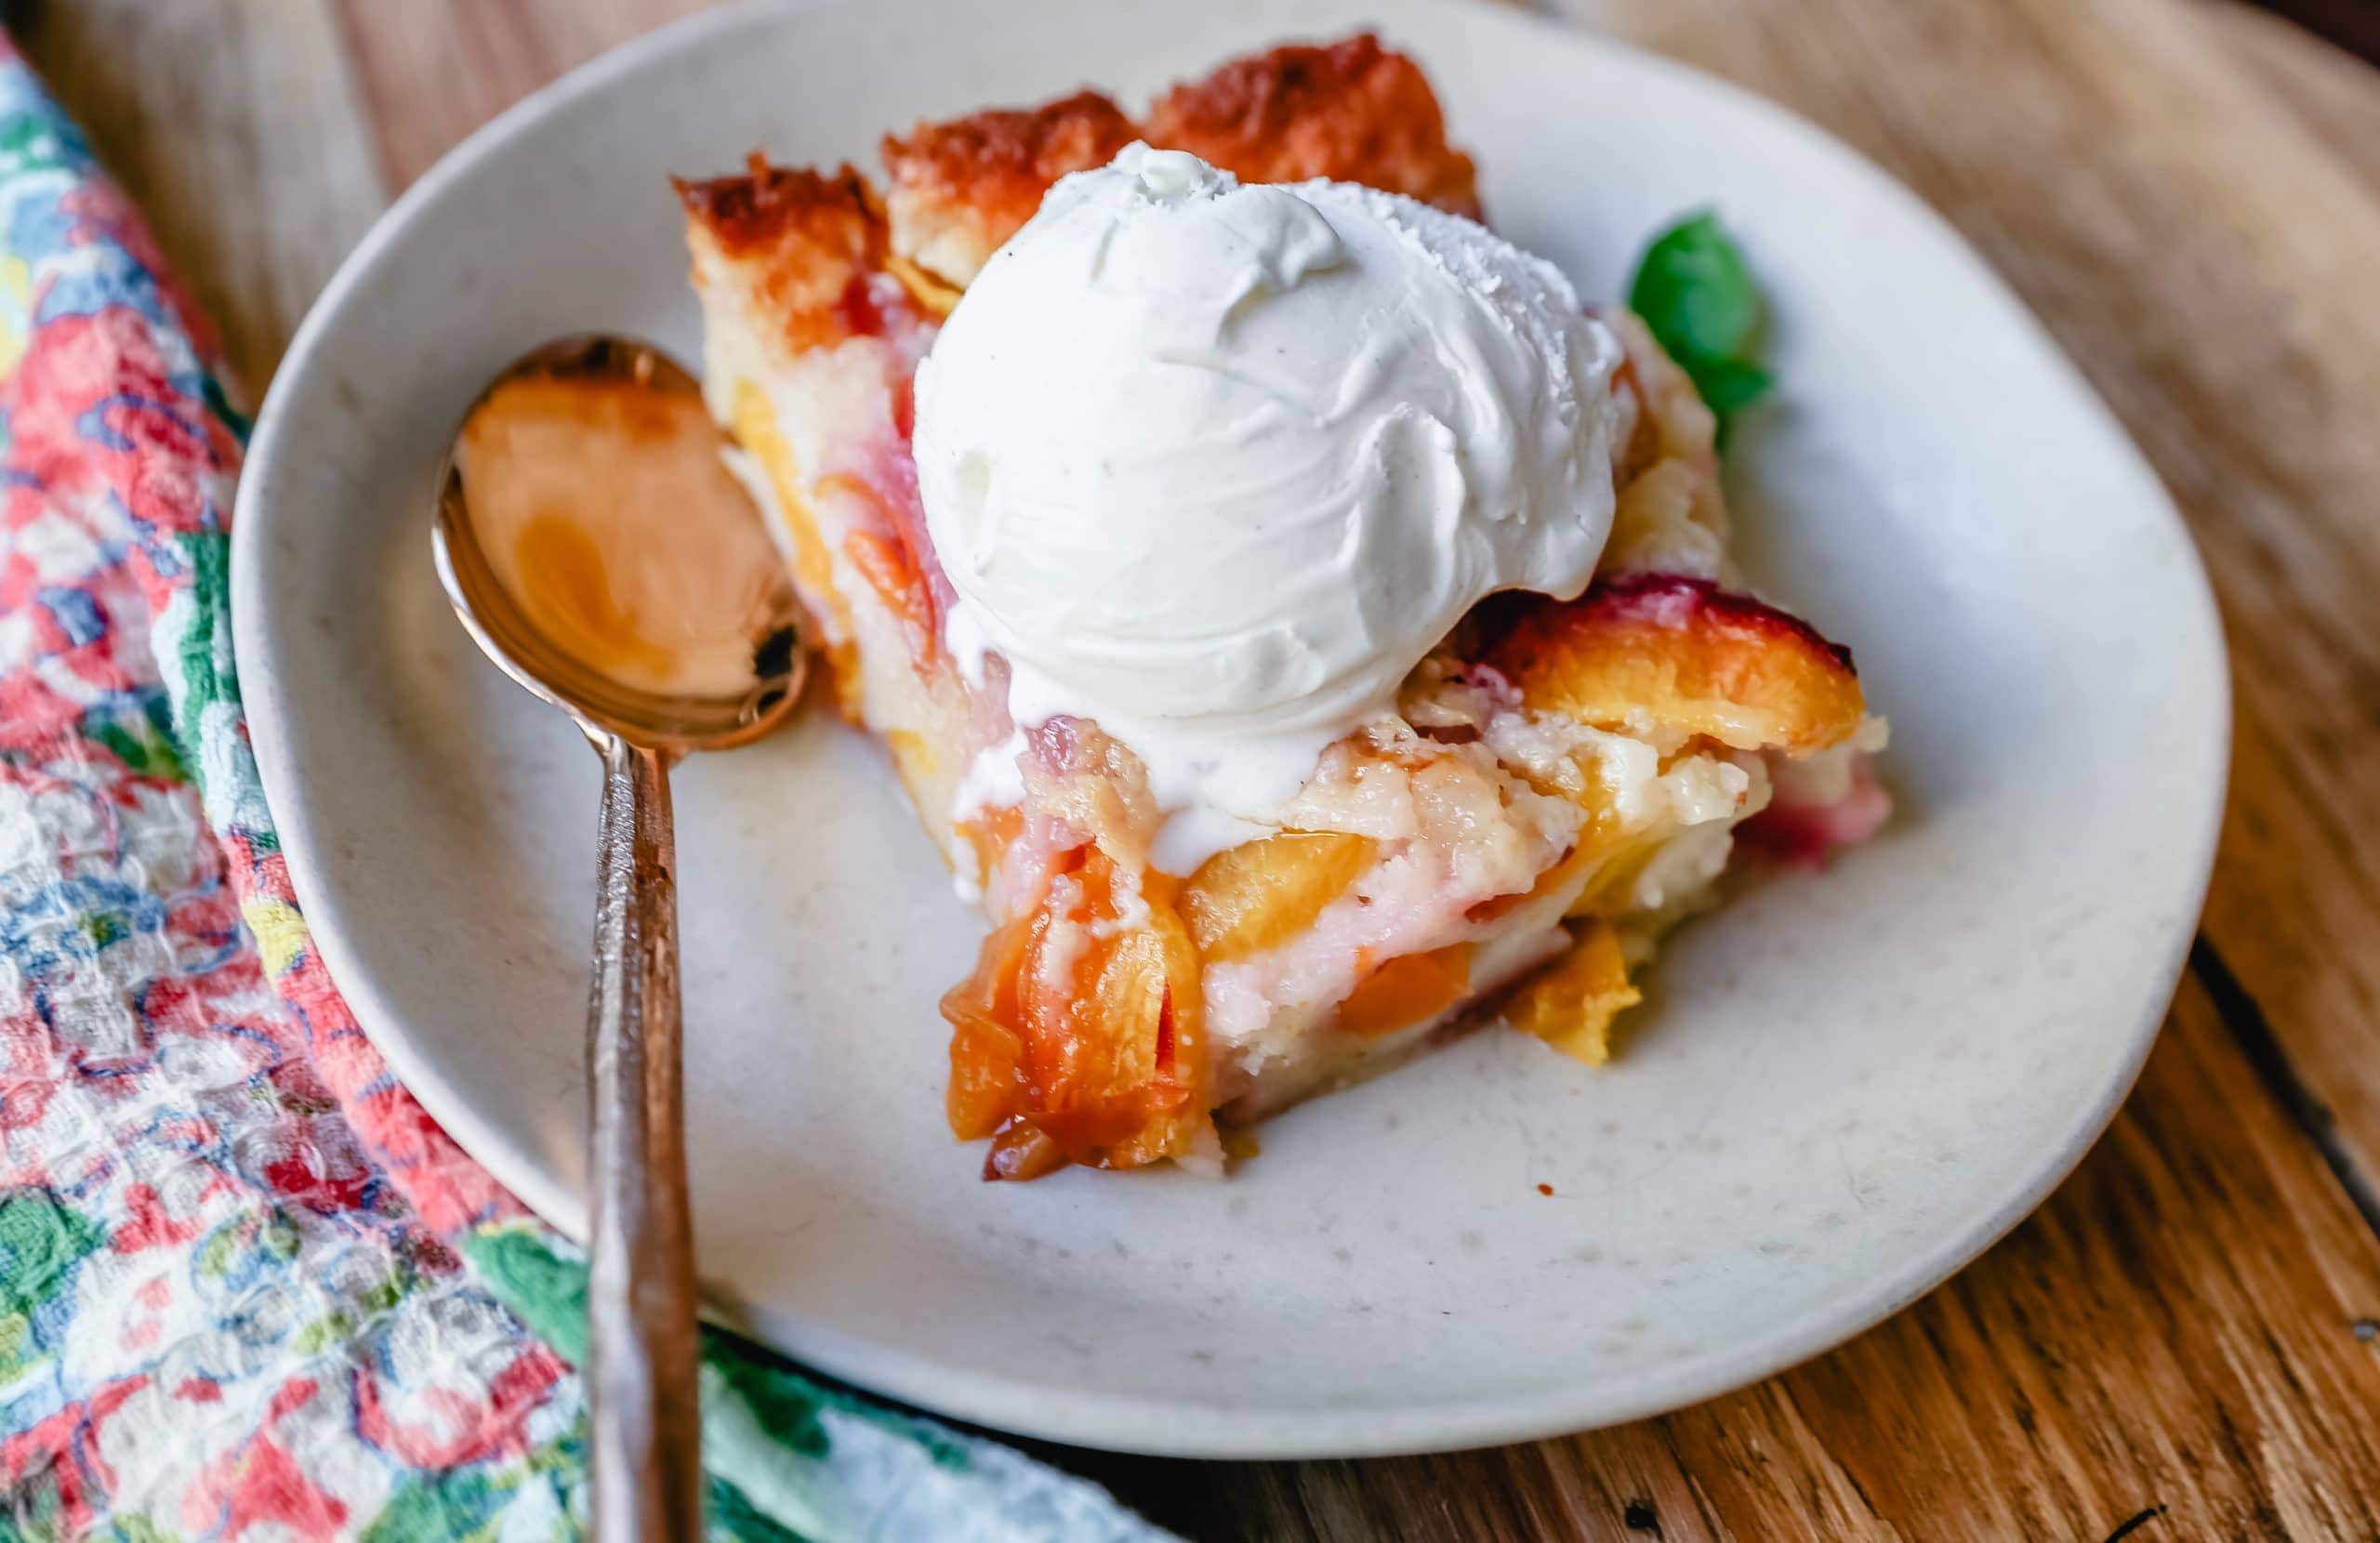 Texas Style Peach Cobbler. Fresh peaches sweetened with sugar and topped with a creamy buttery cake-like topping. A Texas favorite dessert!  #peaches #peachdessert #peachcobbler